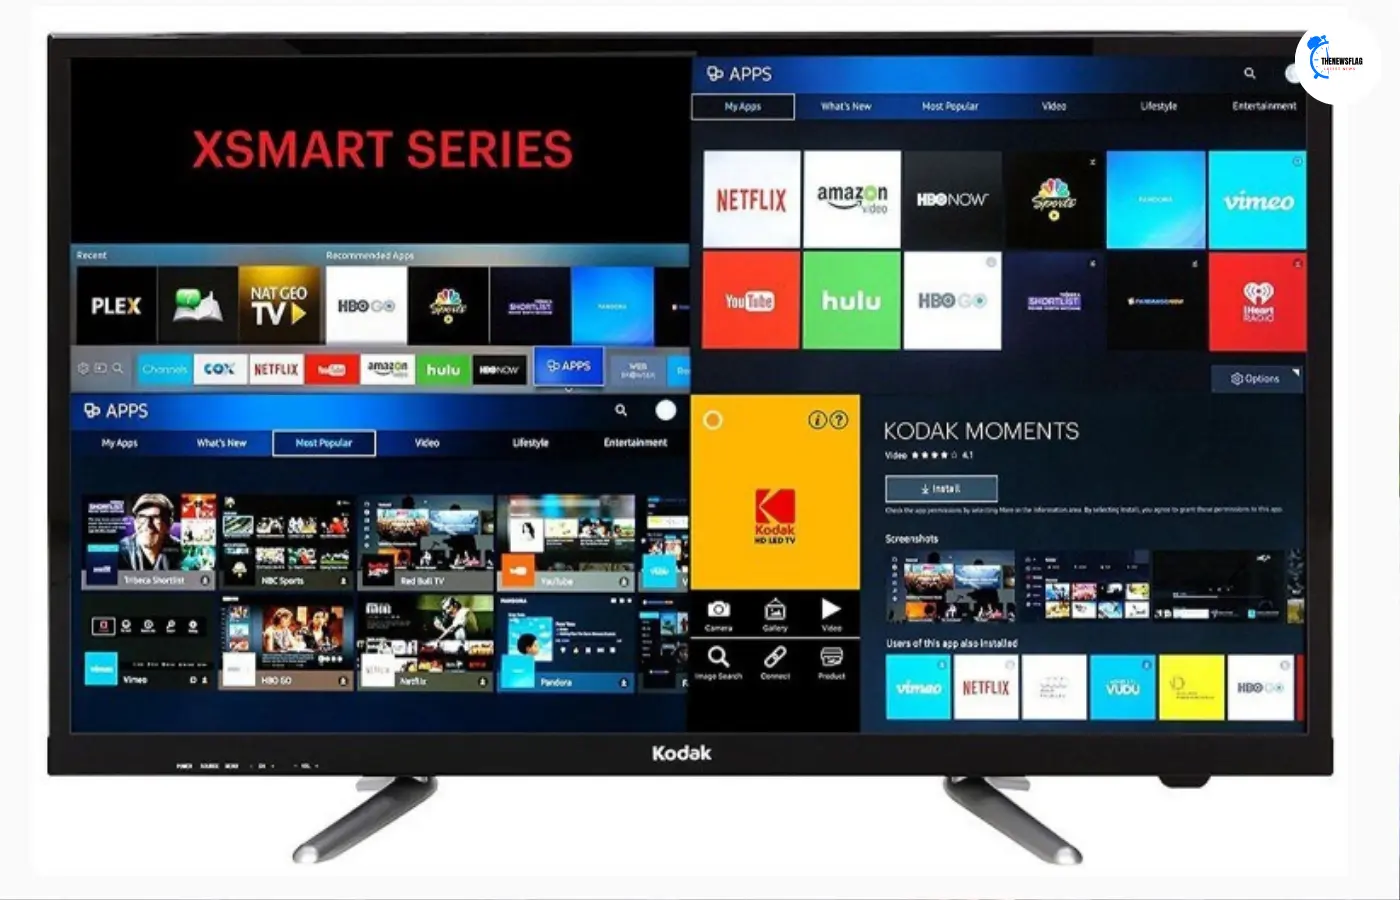 Kodak offered a stylish Smart TV for Rs. 6000 during this IPL